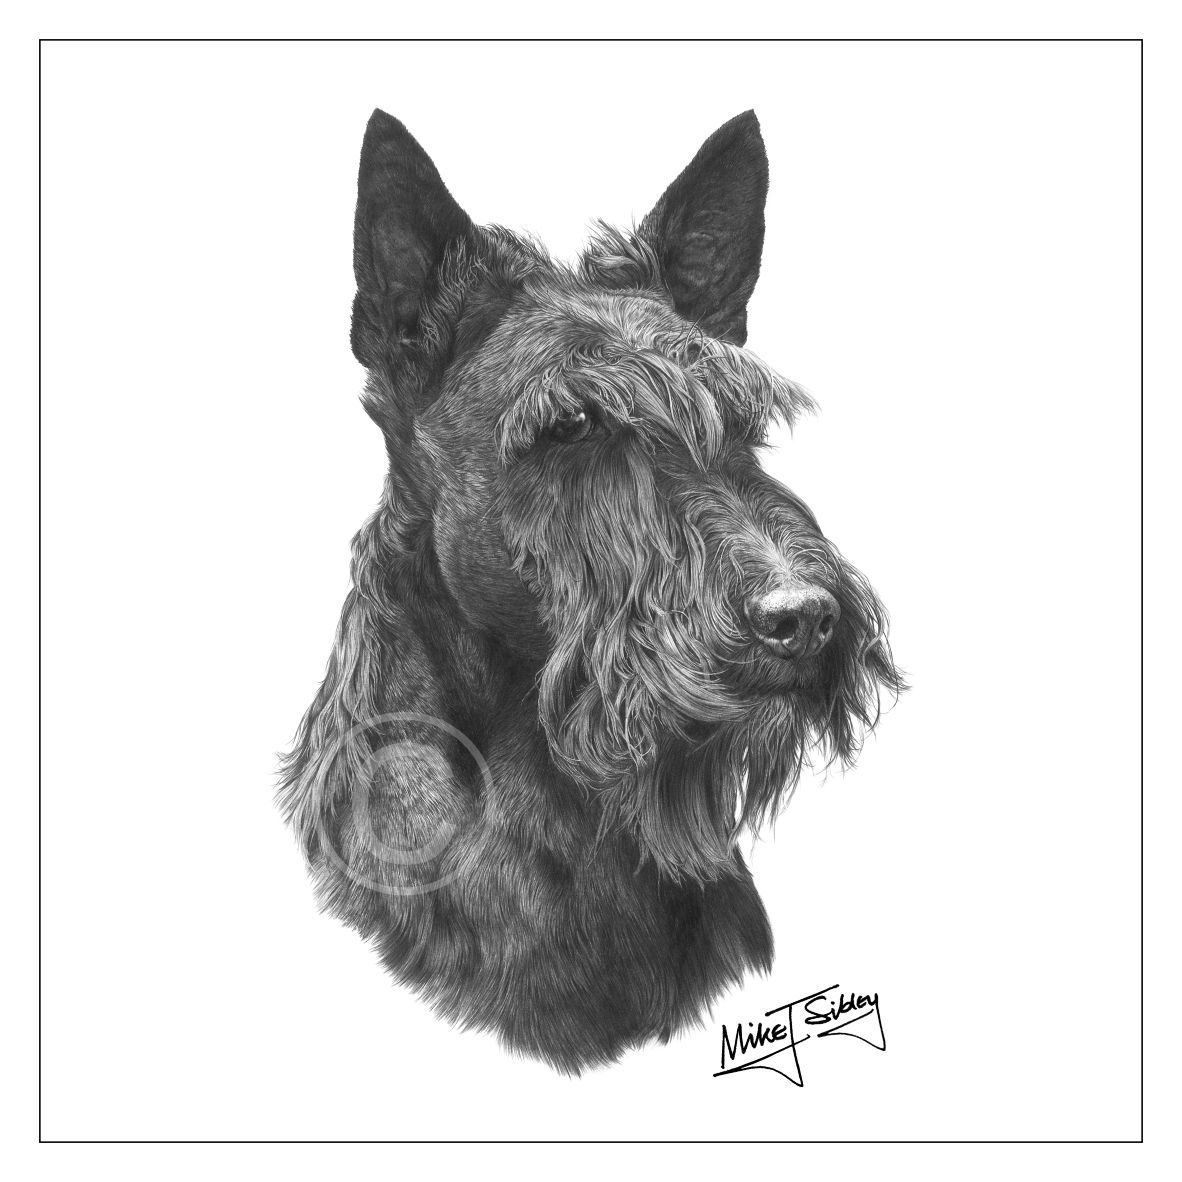 Mike Sibley Design Scottie Greeting Card